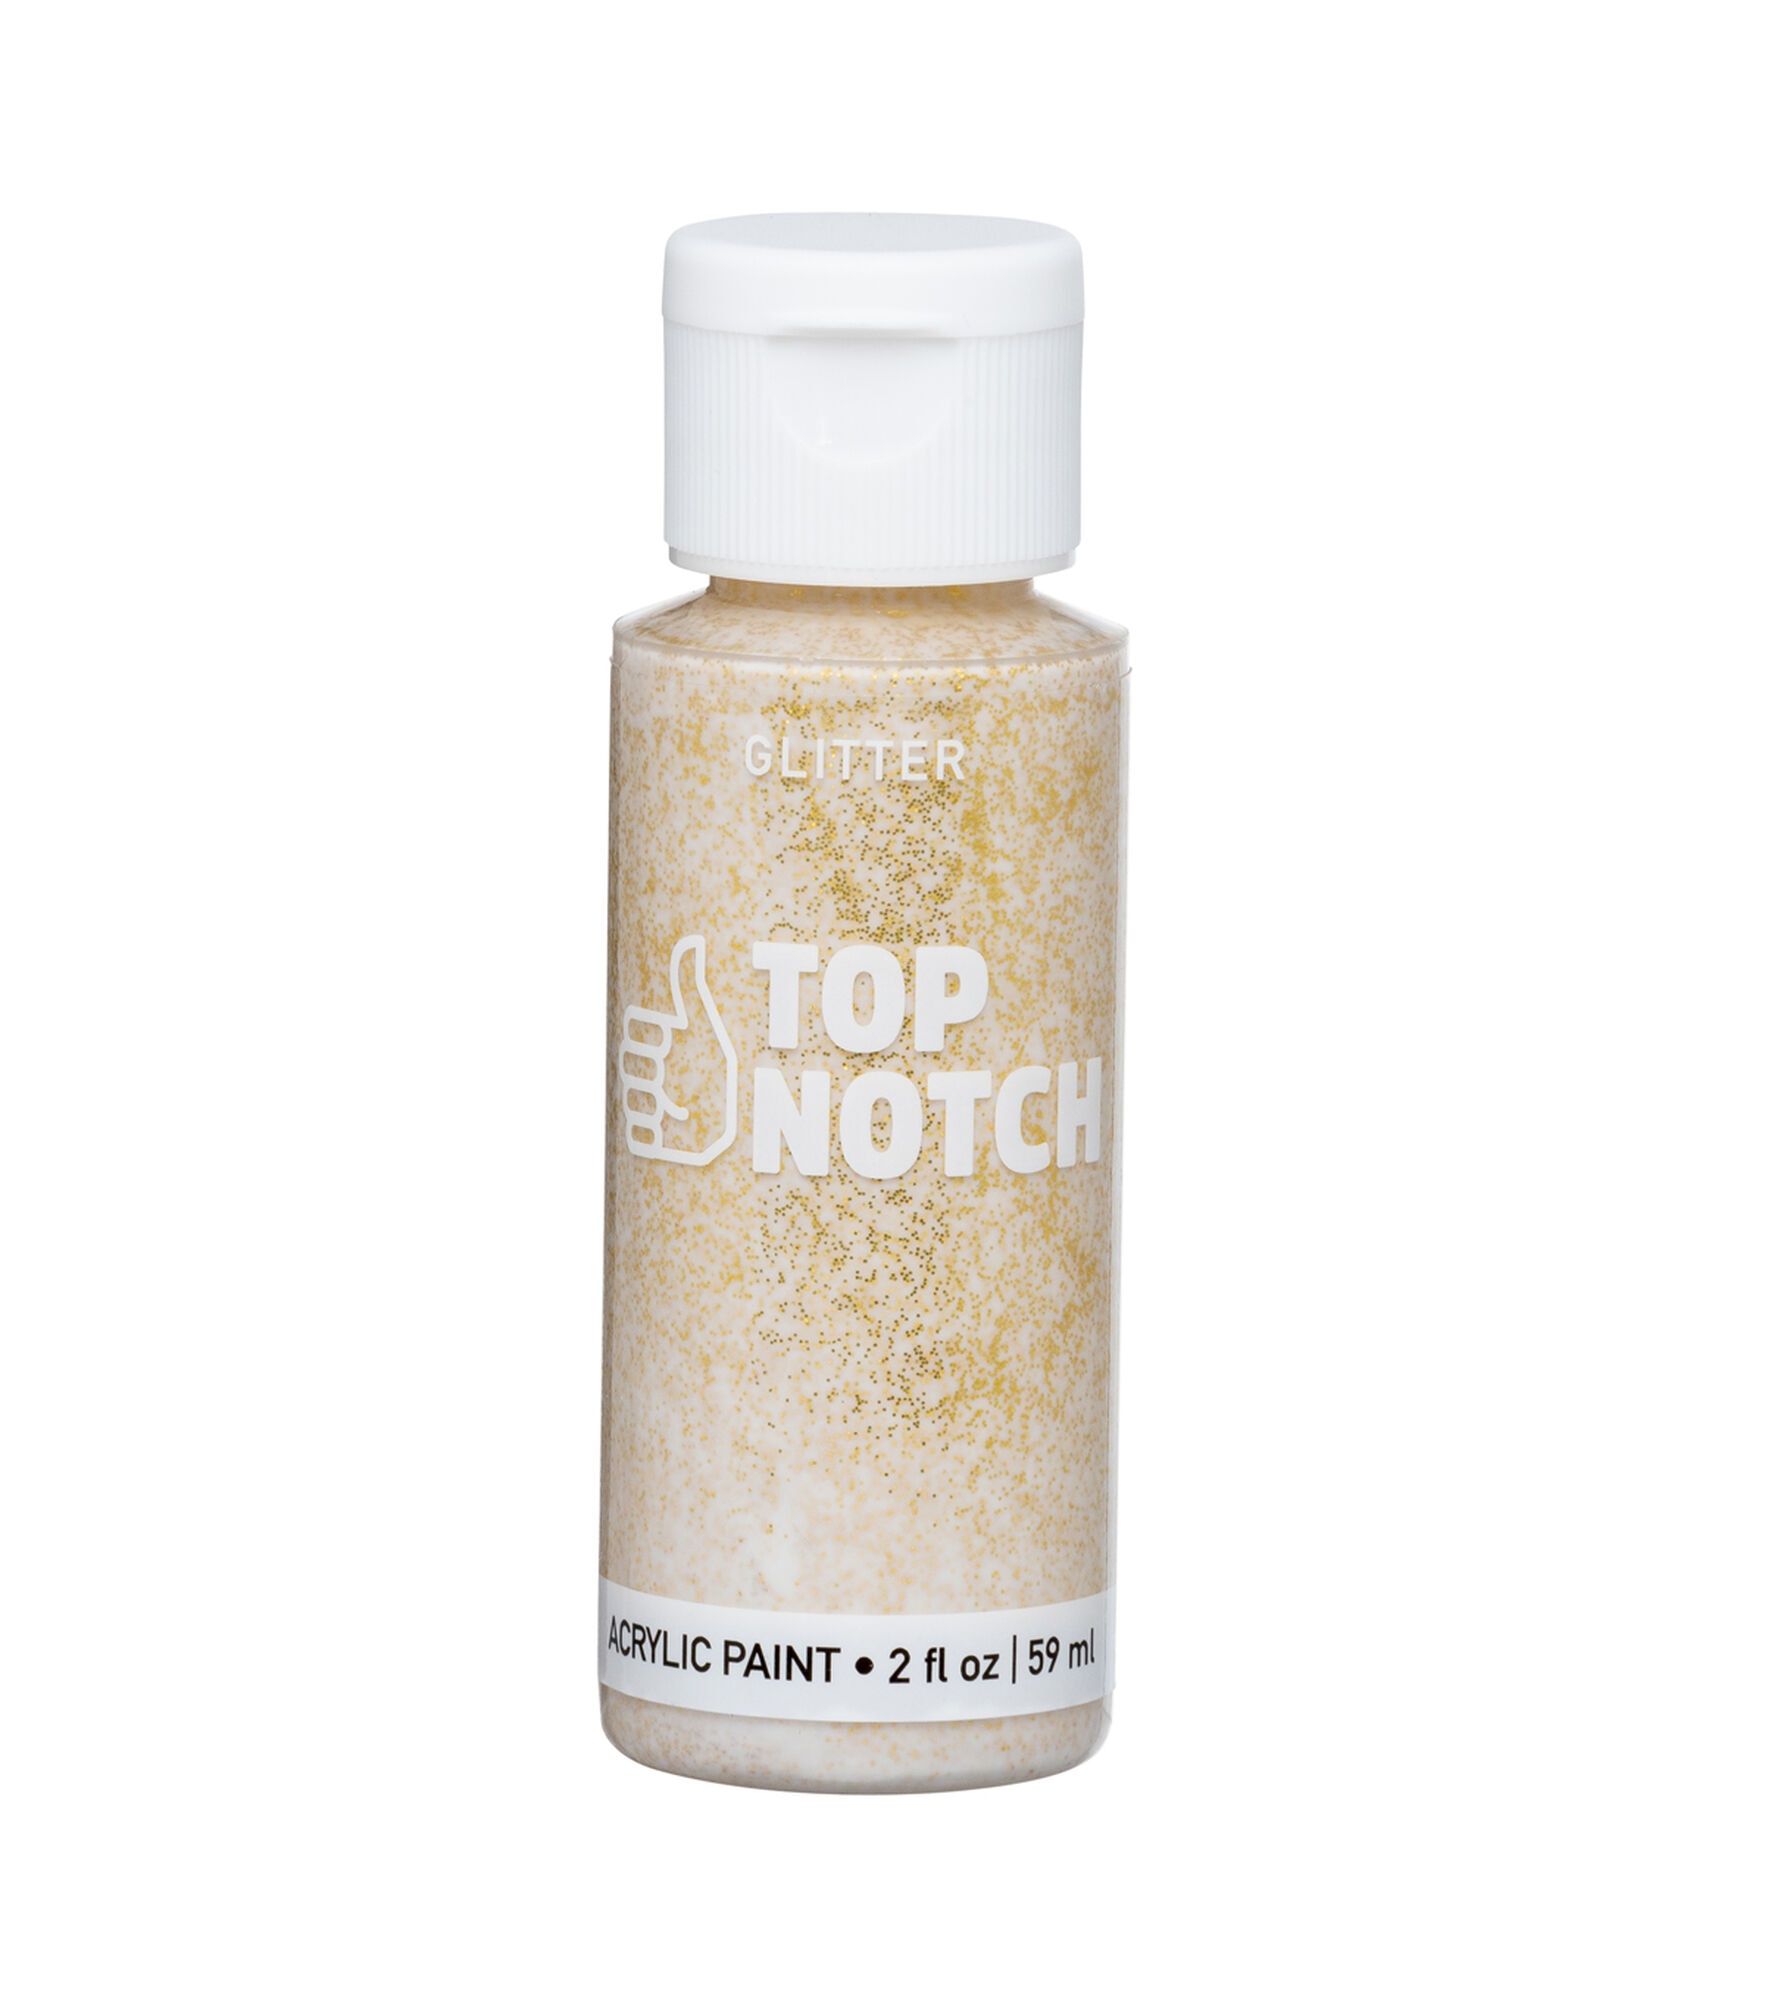 2oz White Glitter Acrylic Craft Paint by Top Notch, Gold, hi-res